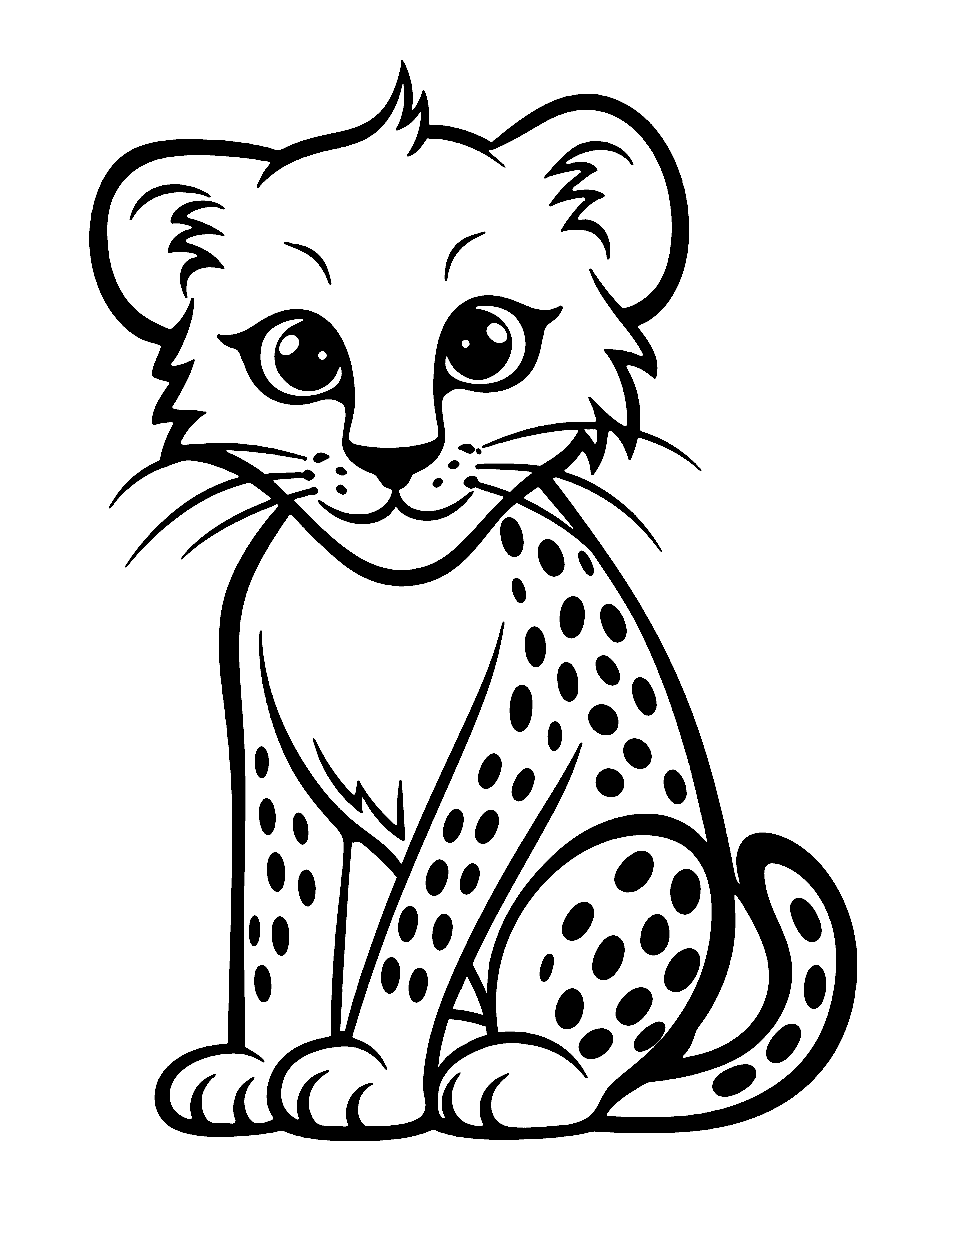 Cute Cheetah Sitting Coloring Page - A charming and adorable cheetah sitting calmly with a gentle smile.